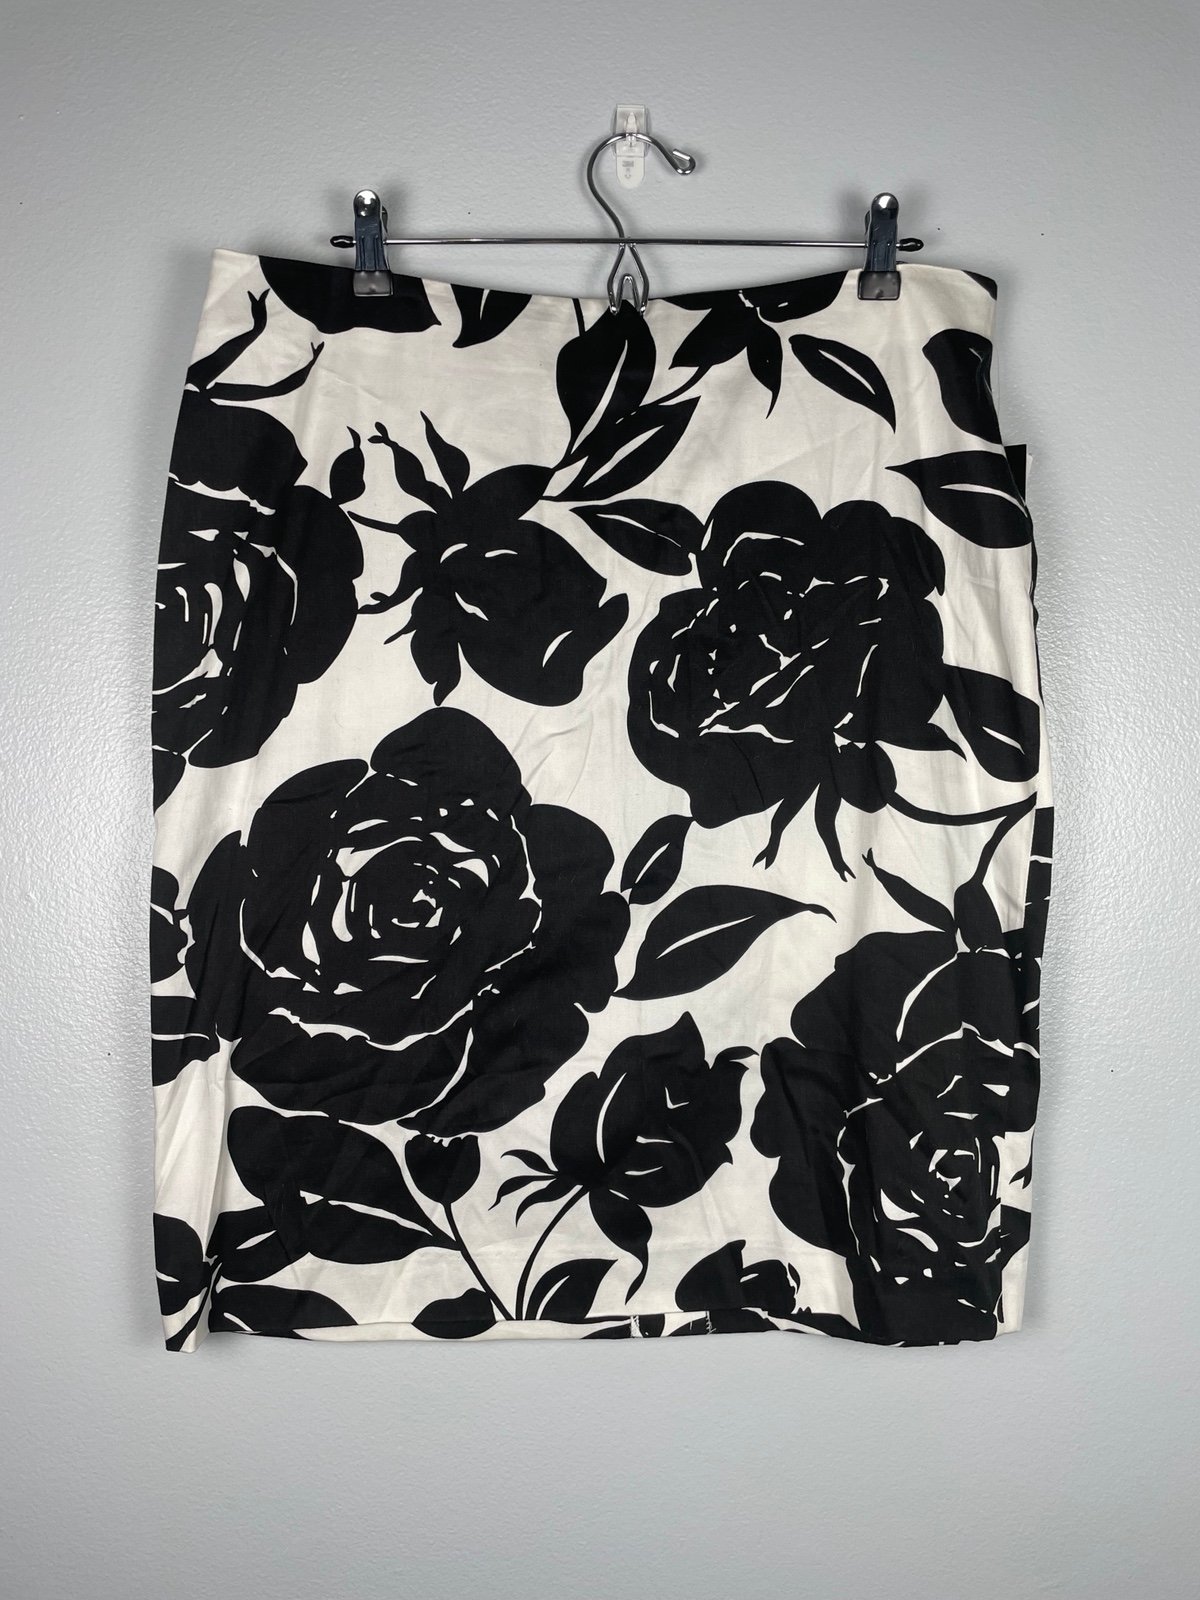 the Lowest price NWT Grace Elements Black and White Flo